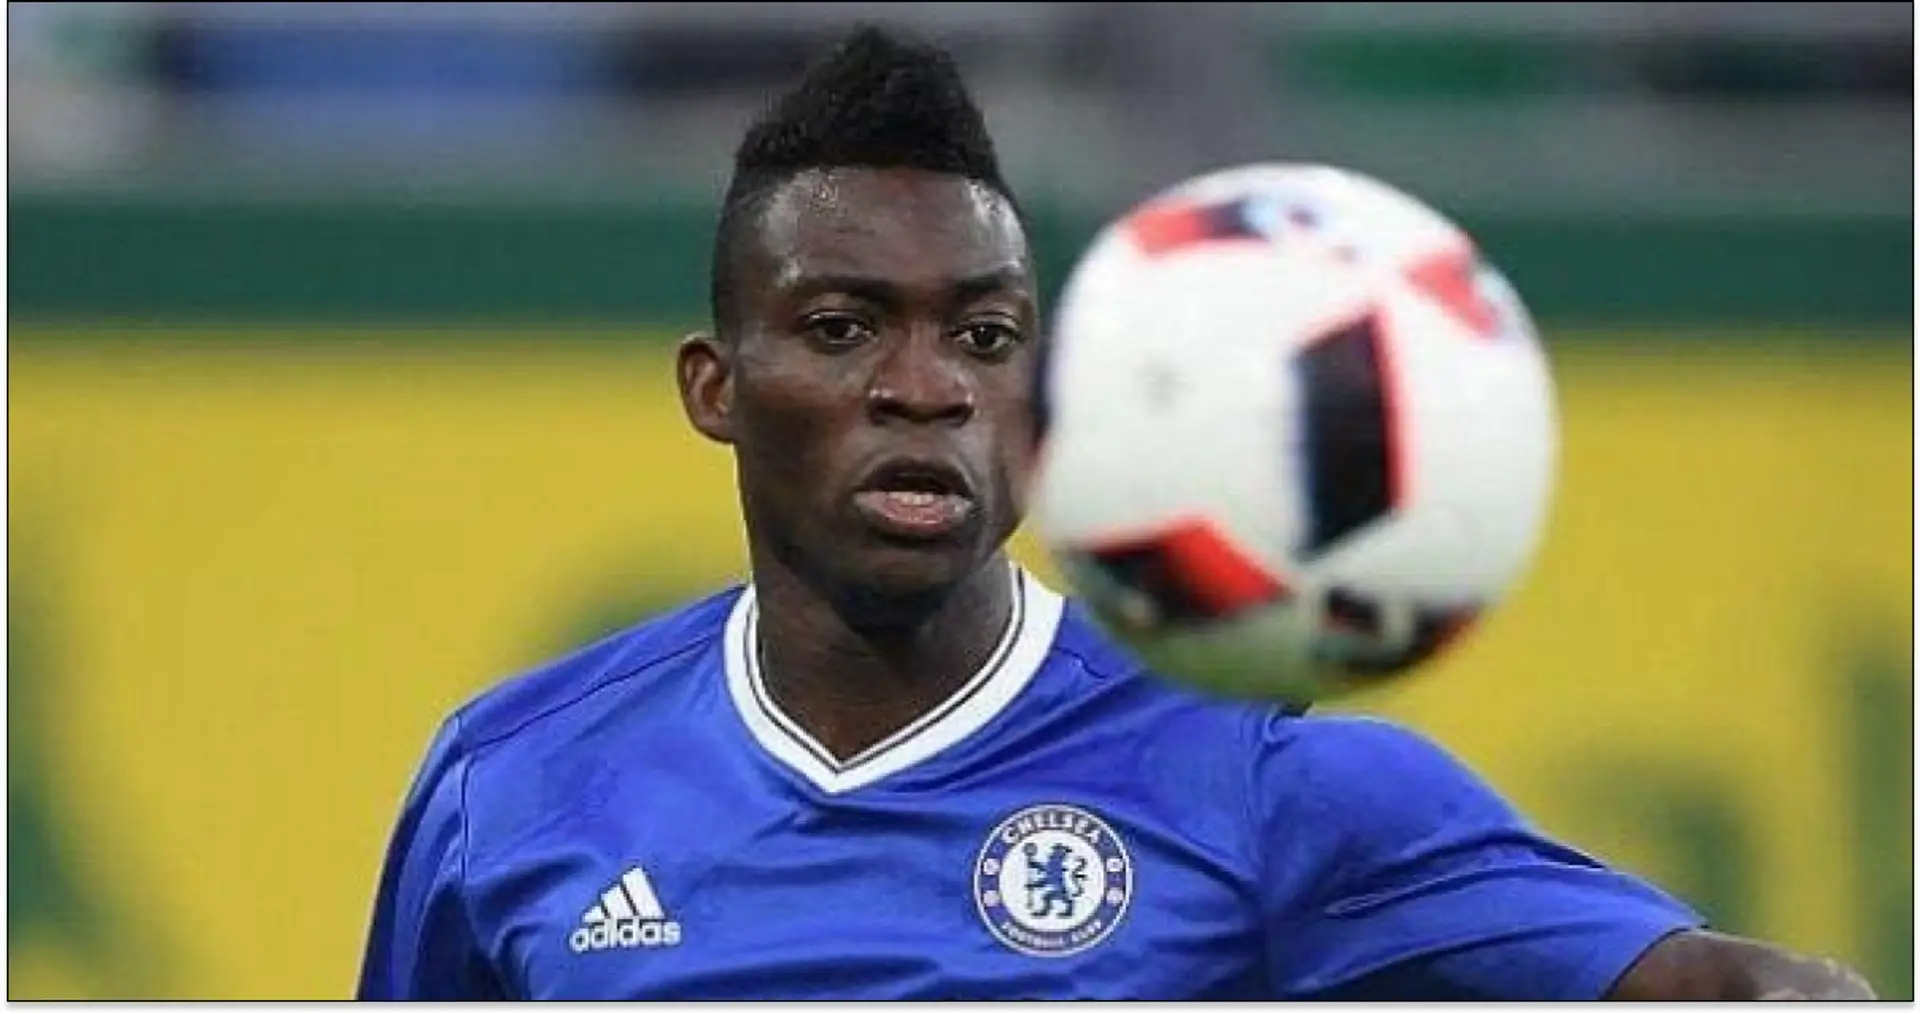 Chelsea send message of support to ex-Blue Christian Atsu who's missing after Turkey earthquake